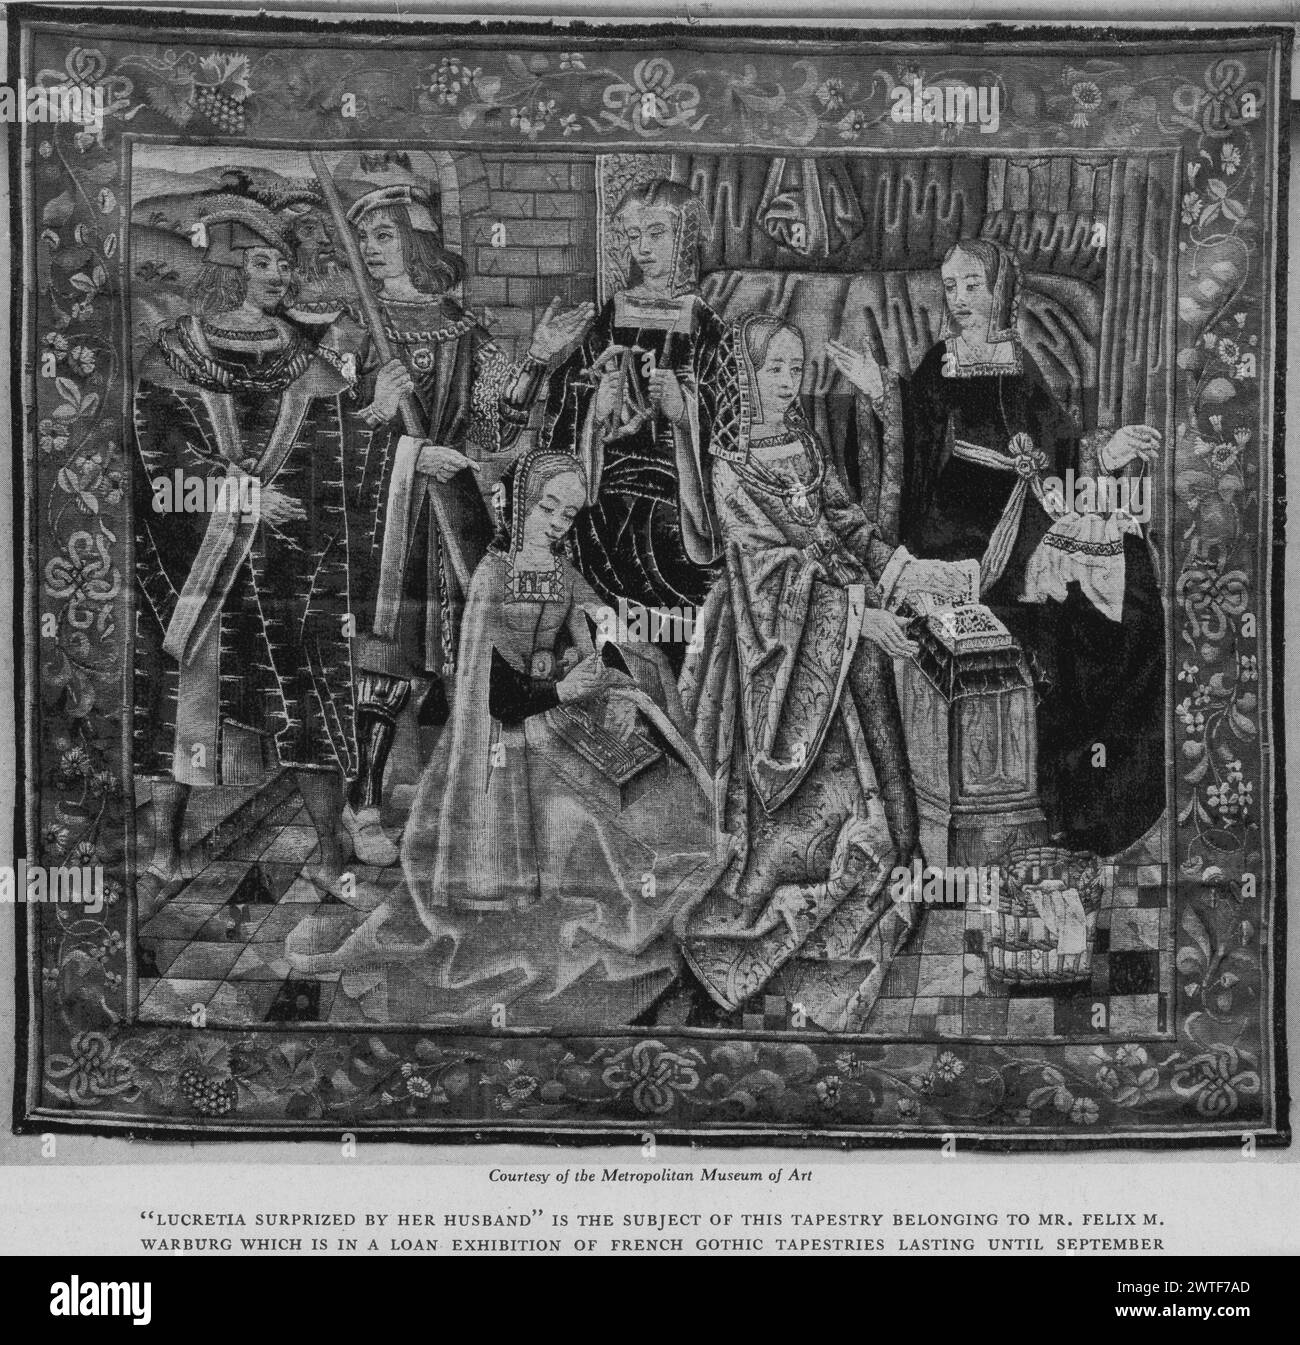 Lucretia surprised by her husband Collatinus and Sextus Tarquinius. unknown c. 1510 Tapestry Dimensions: H 6'10' x W 7'10' Tapestry Materials/Techniques: unknown Culture: Southern Netherlands Weaving Center: unknown Ownership History: French & Co. purchased from Charles 4/15/1920; sold to Felix M. Warburg 11/30/1920. Collatinus & Sextus Tarquinius (L) enter room with 4 ladies, includint Lucretia, engaged in sewing & reading (BRD) twisting vine with ribbons & blooming flowers Tapestry rewoven in the 19th century [?] (Campbell). 2 other tapestries were purchased with this panel (Stock sheet). Fr Stock Photo